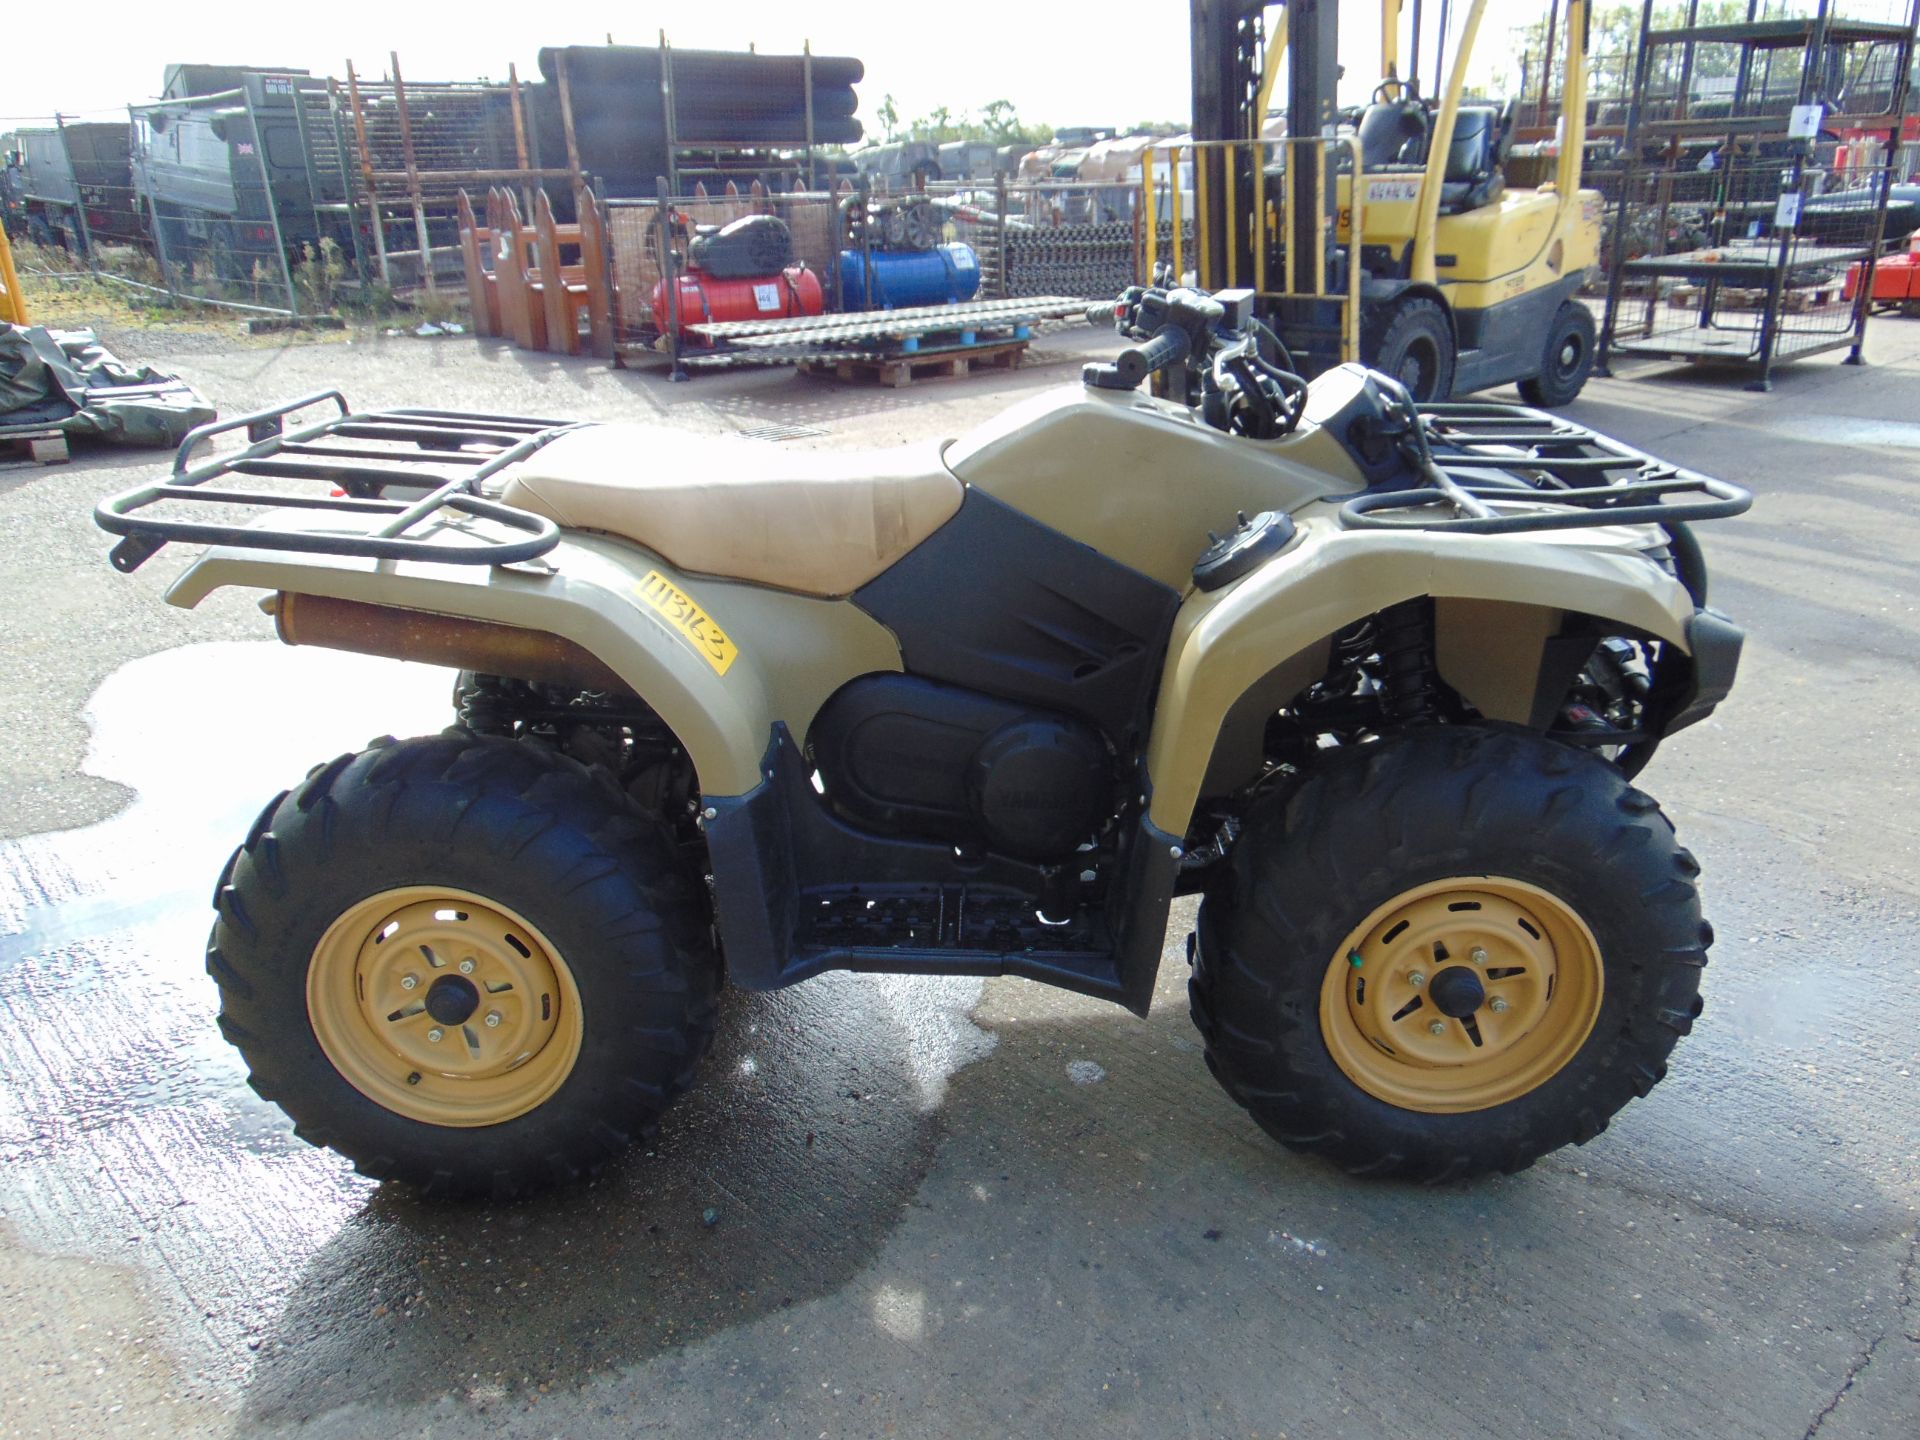 Military Specification Yamaha Grizzly 450 4 x 4 ATV Quad Bike ONLY 214 HOURS!!! - Image 4 of 22